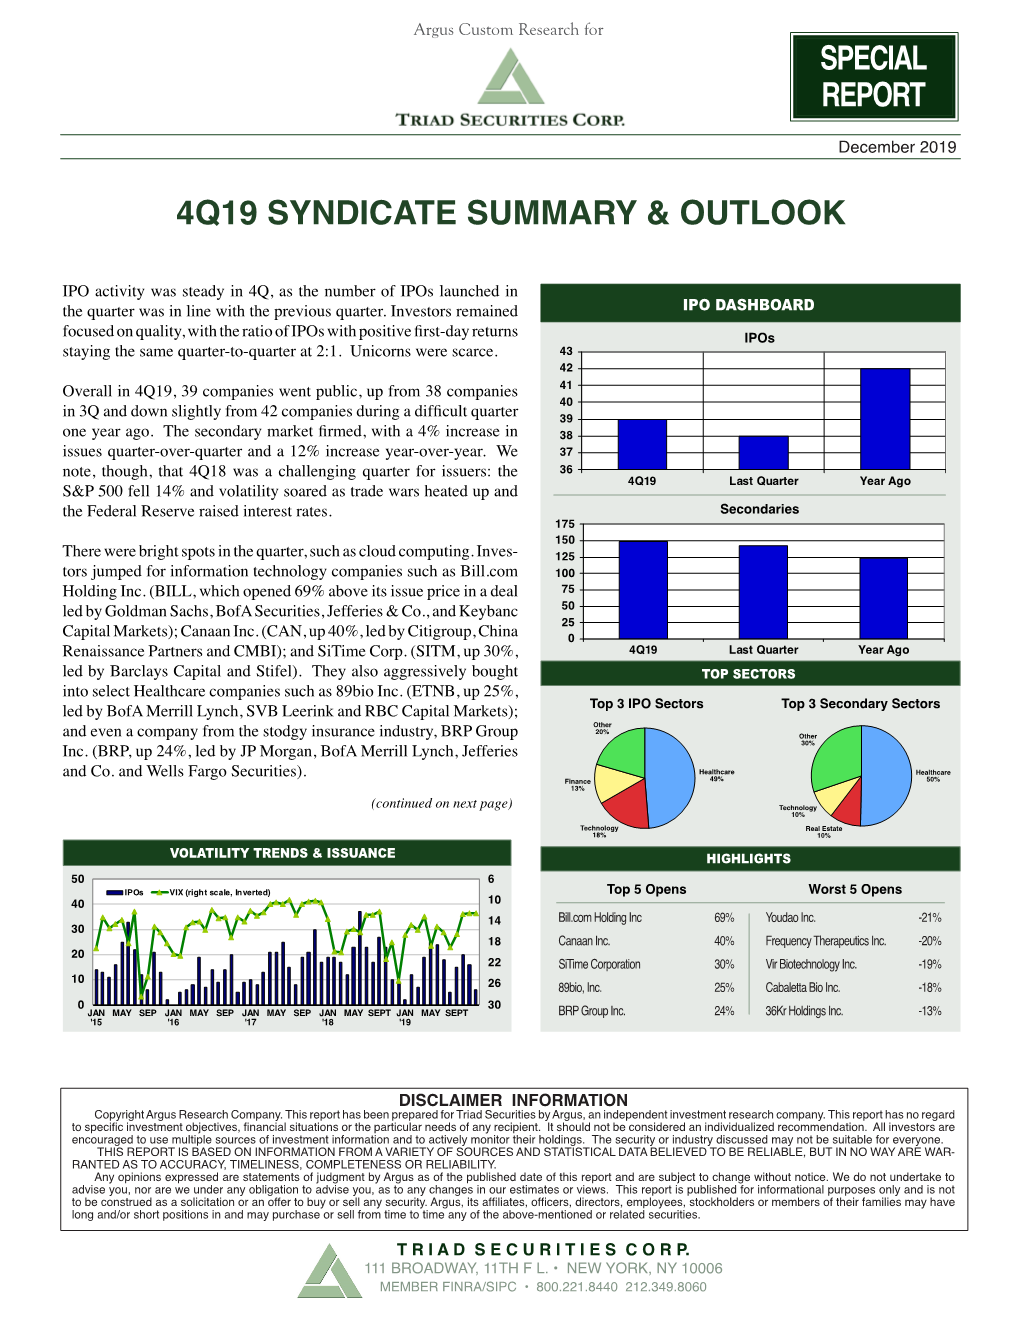 4Q19 Syndicate Summary & Outlook Special Report